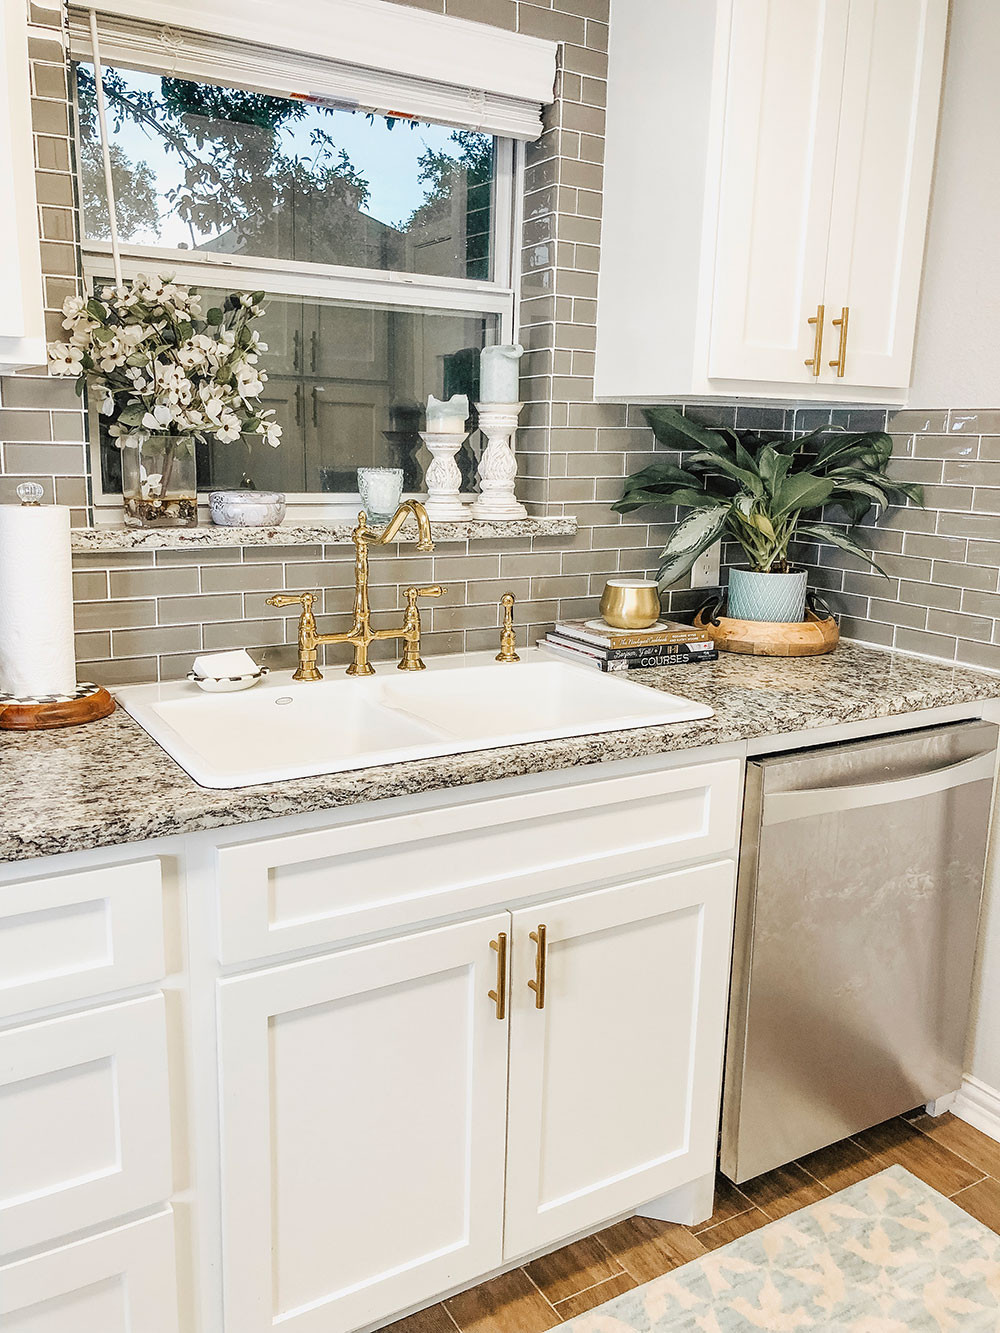 Small Kitchen Sink Ideas
 Our Kitchen Sink Woes Our Small Kitchen Reveal